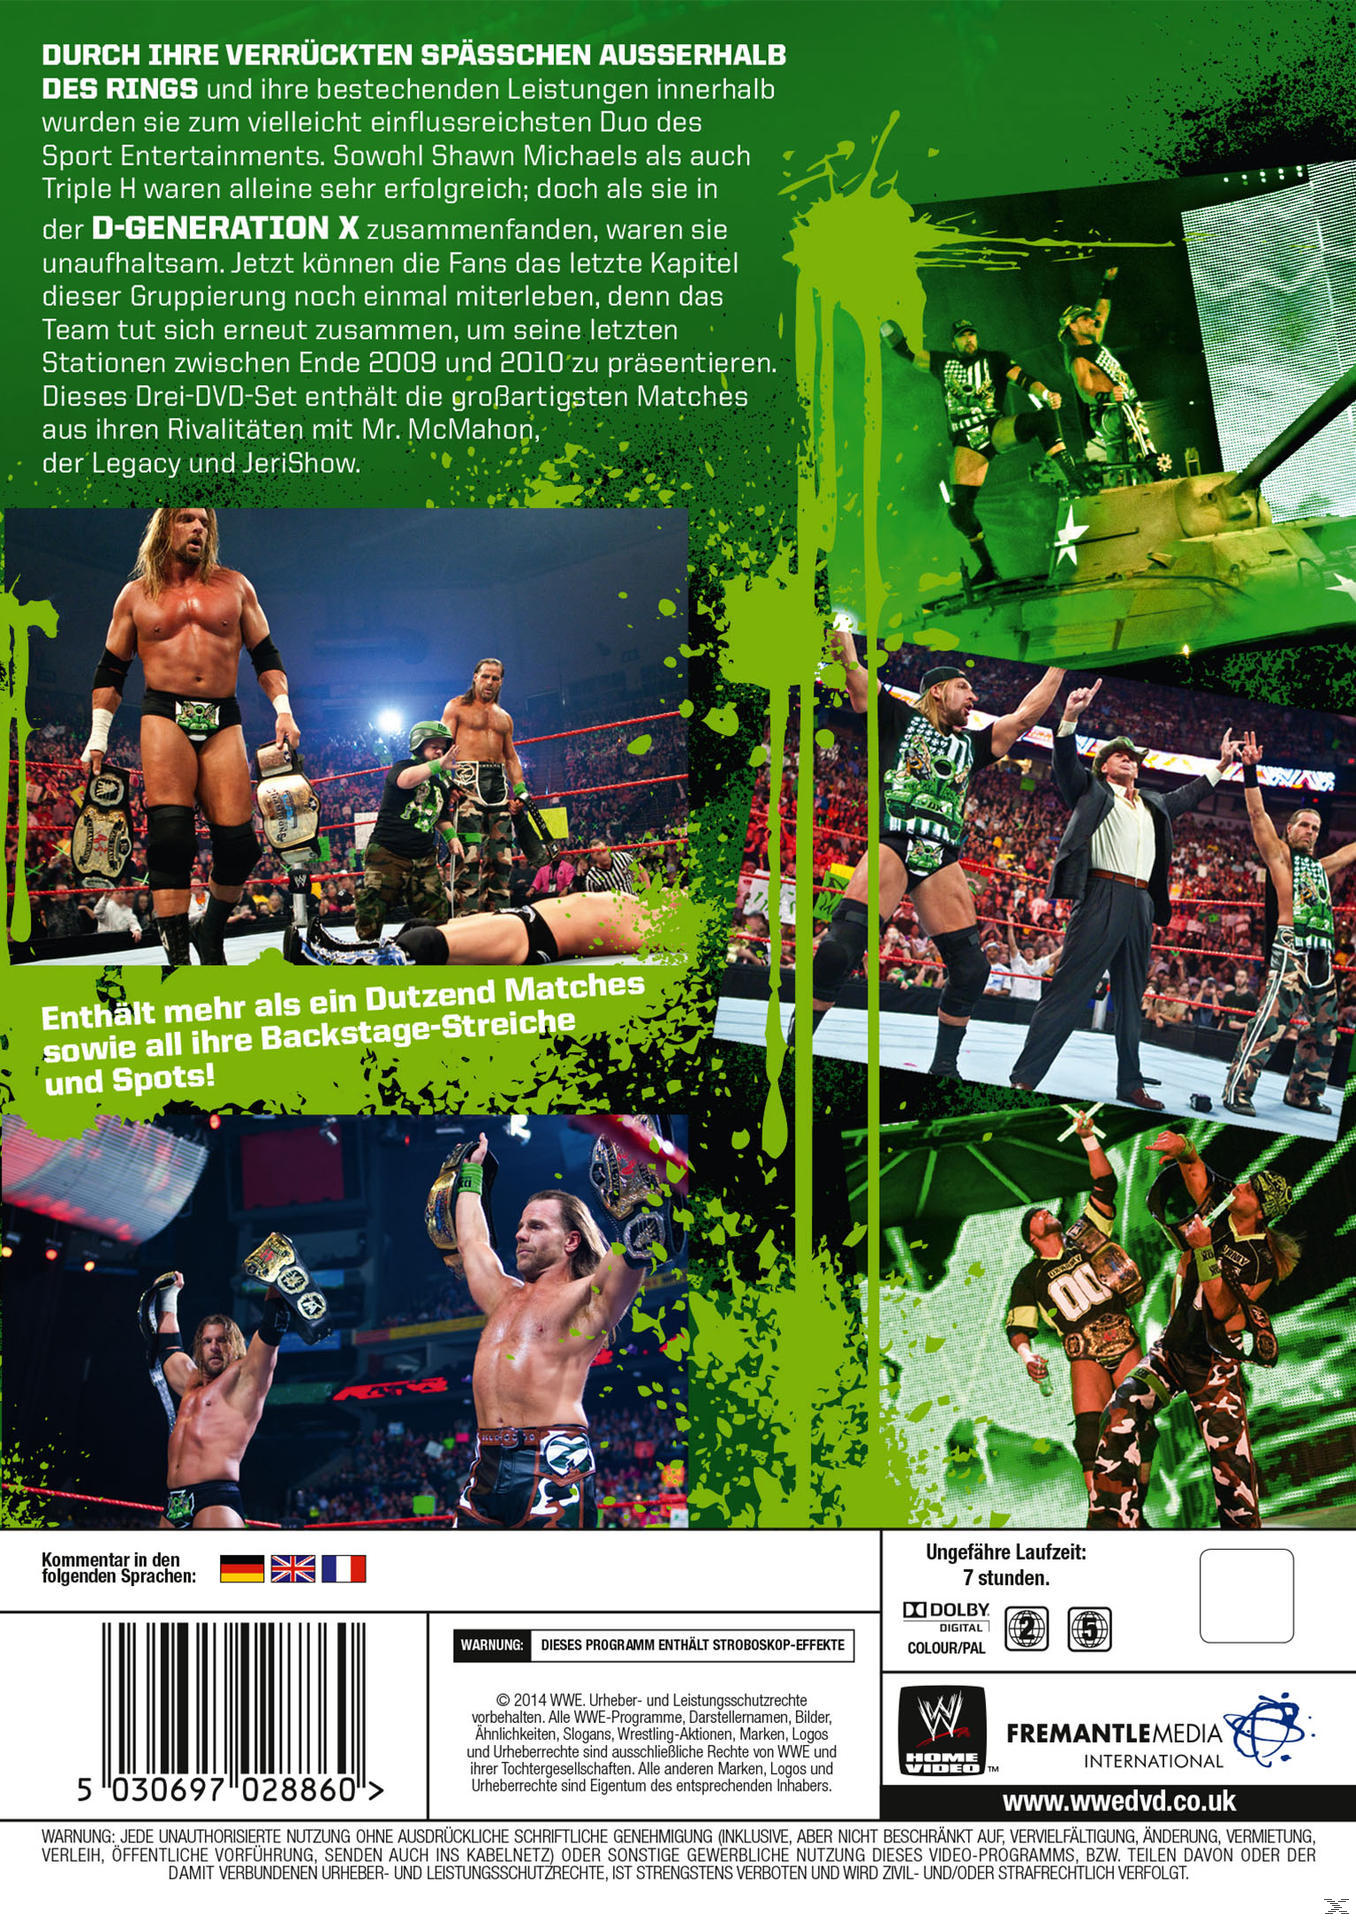 Last DX - DVD Stand One